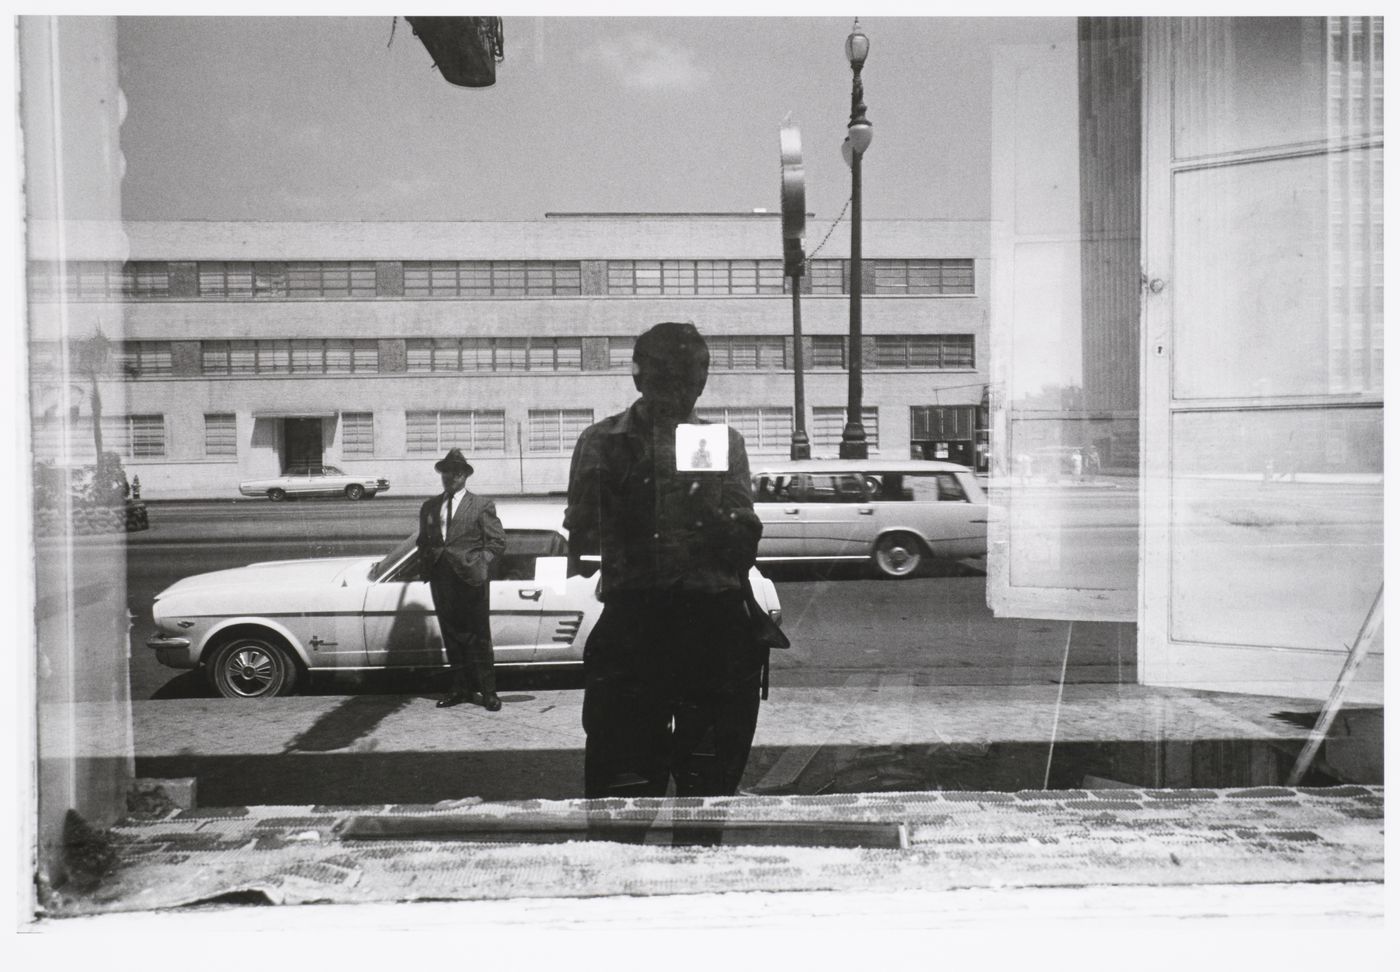 Double self-portrait with Polaroid picture taped to window reflecting artist and street scene, New Orleans, Louisiana